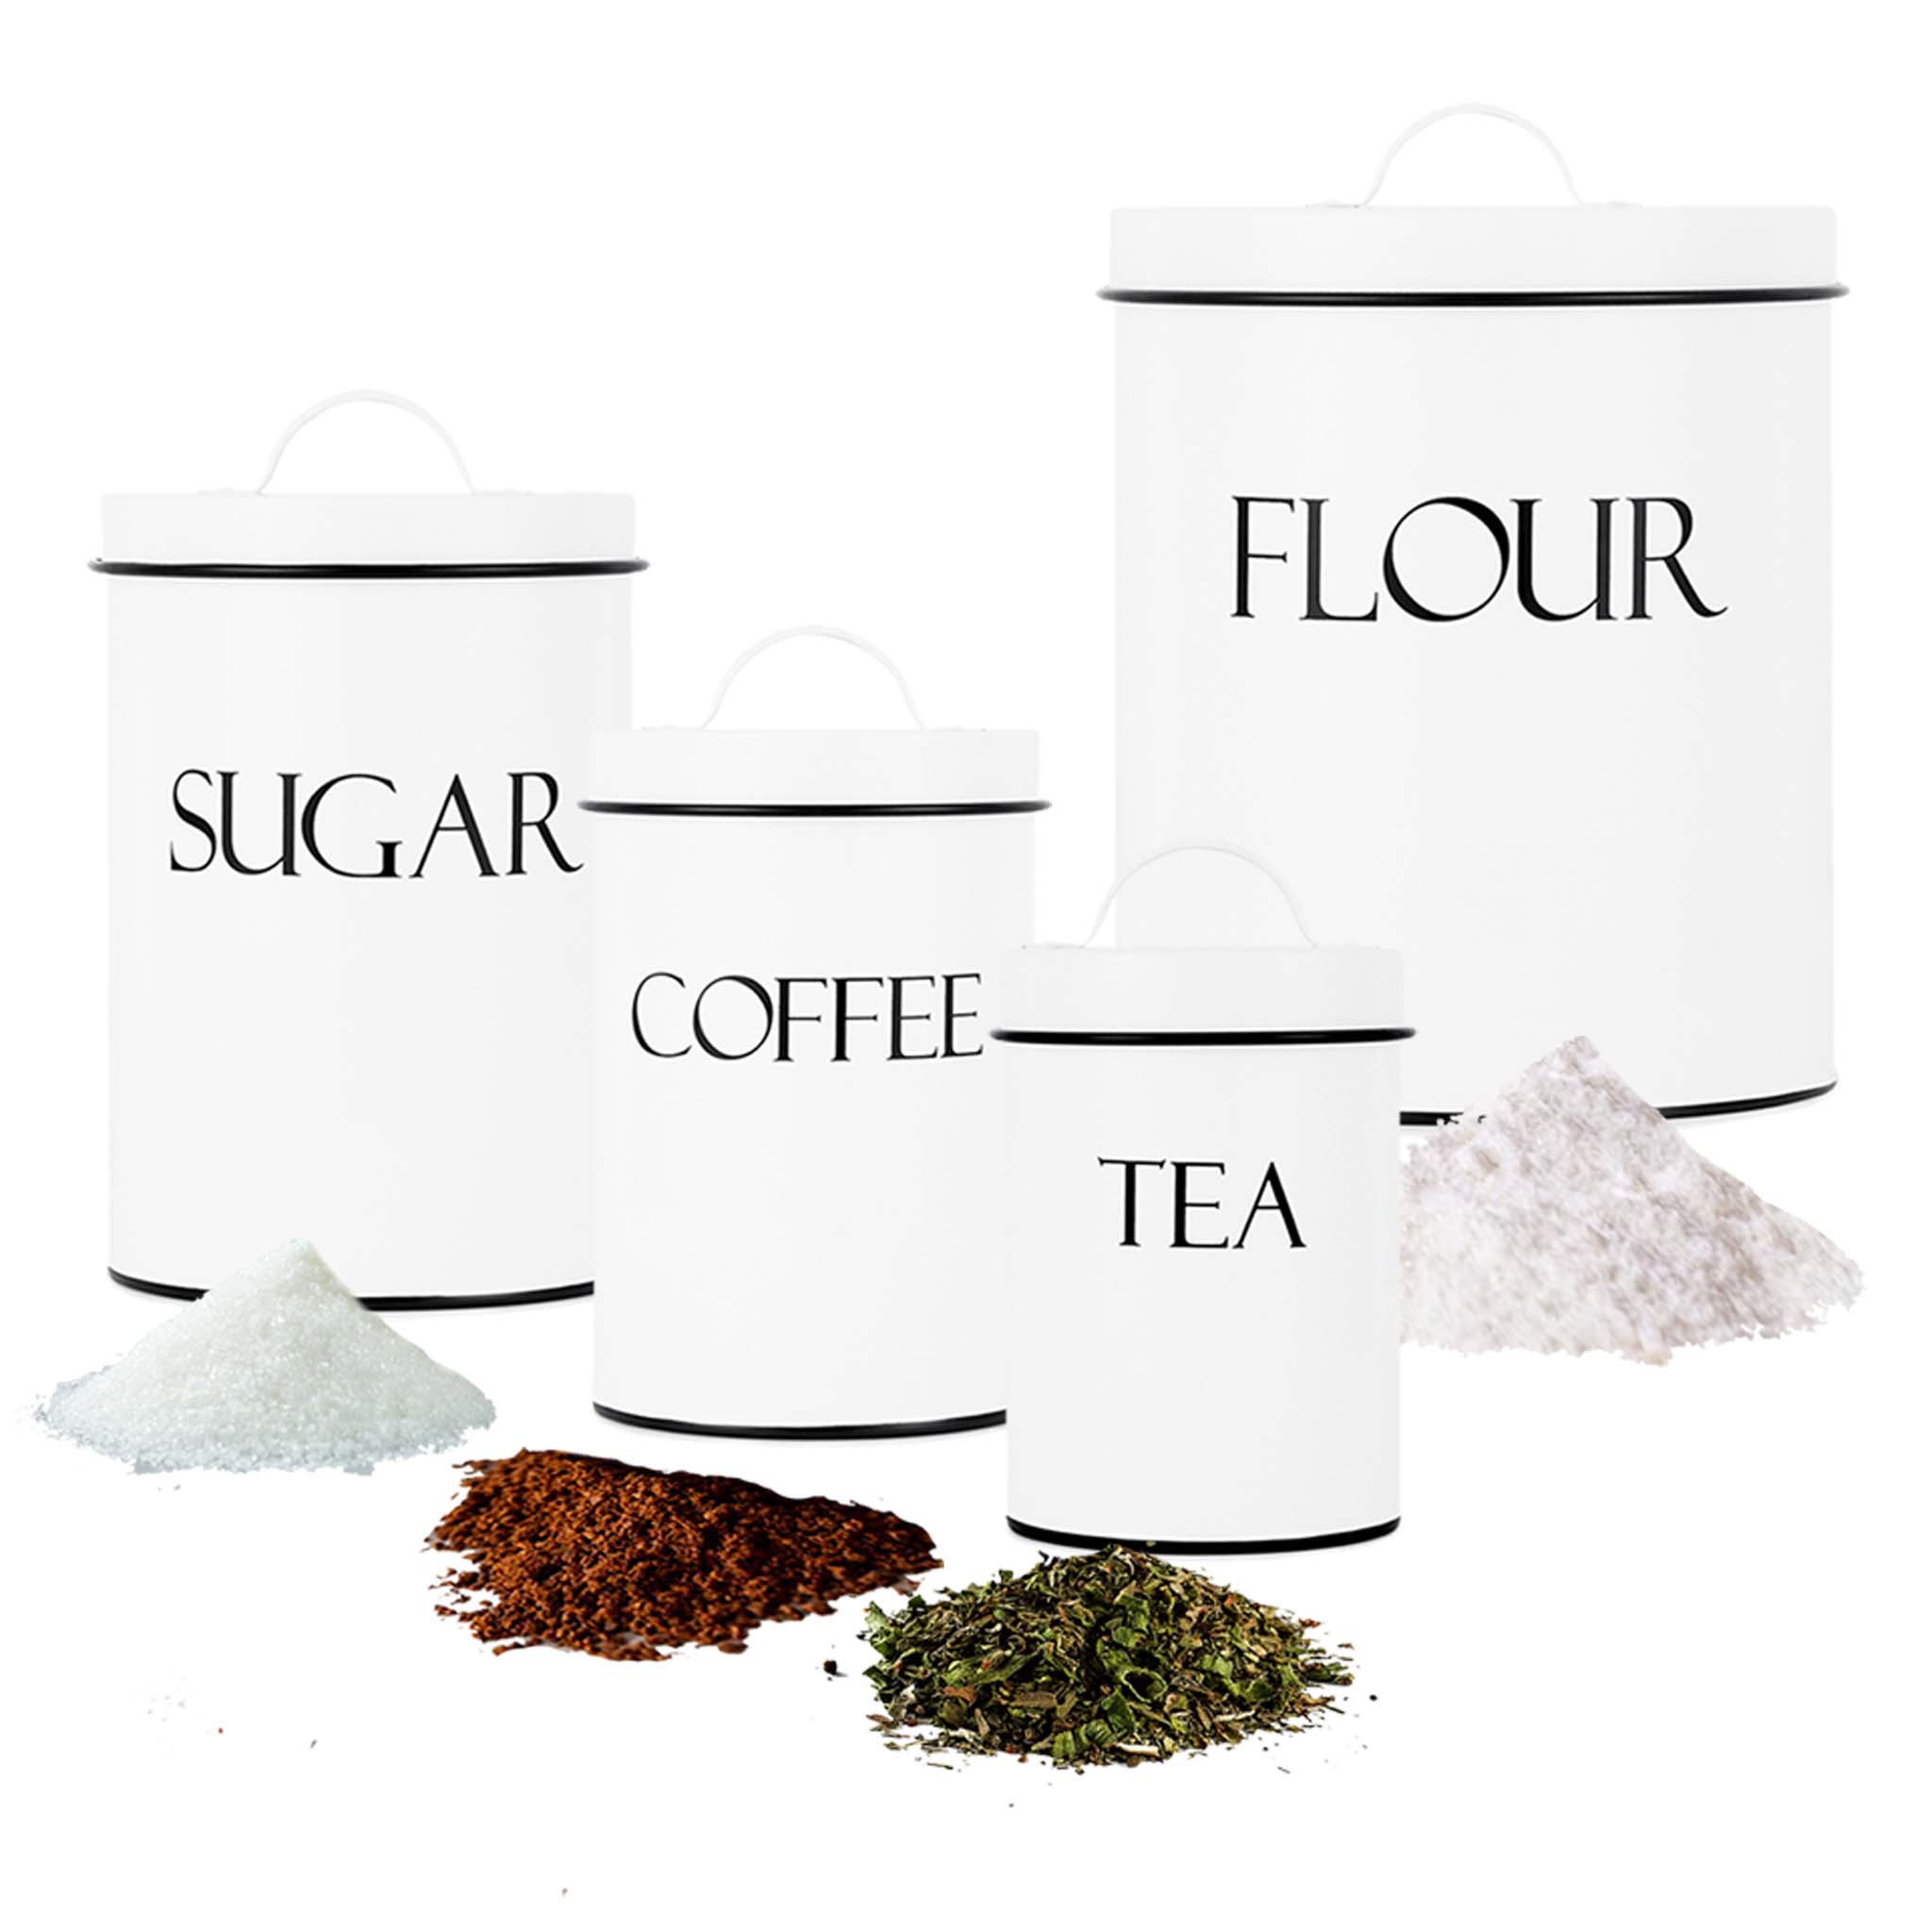 Kitchen Canisters - White Sugar, Flour, Coffee Canisters, Set of 3